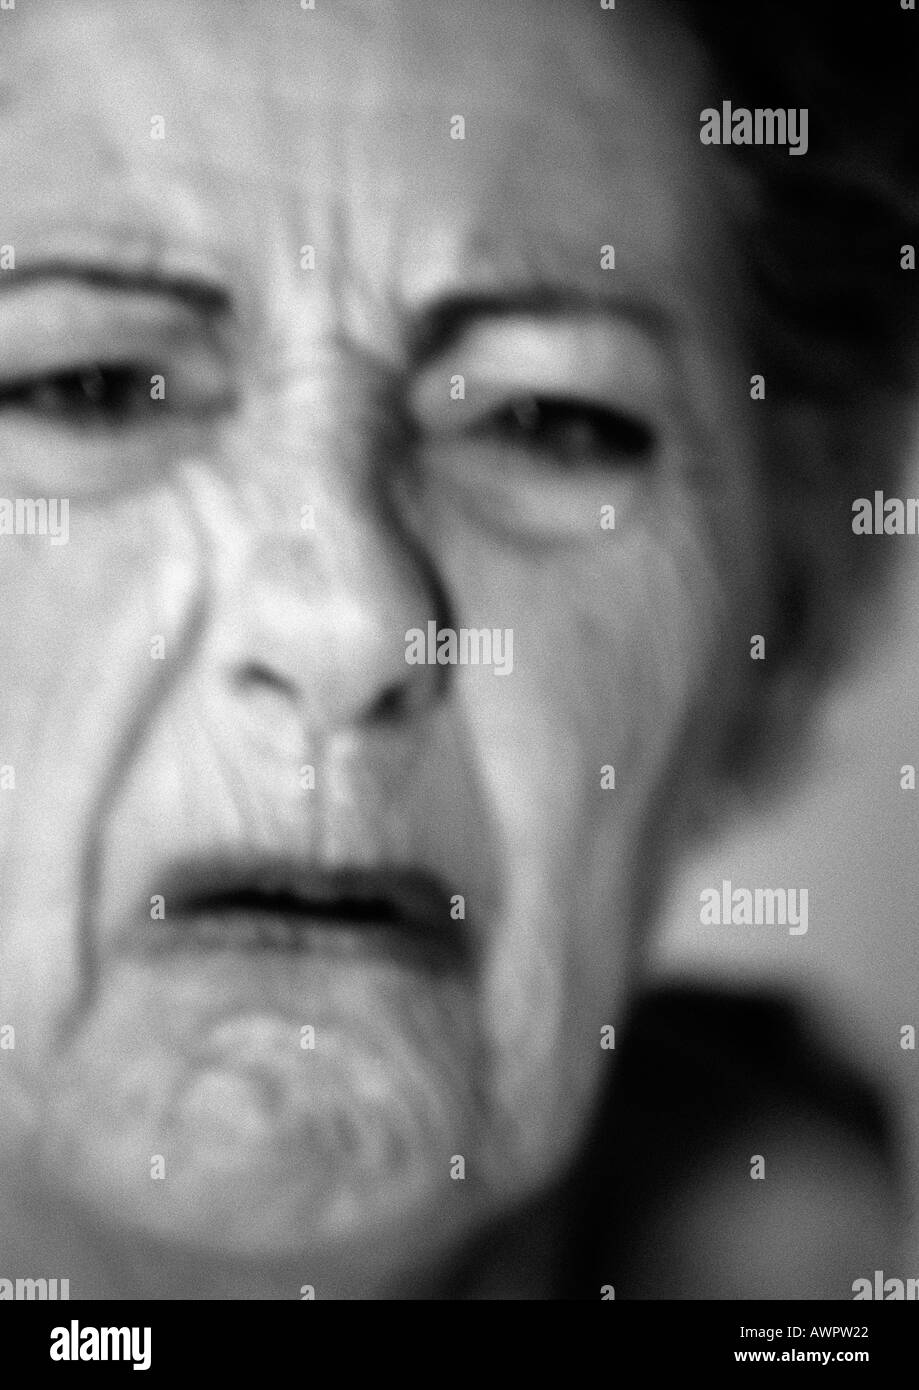 Senior woman frowning, close-up, portrait, b&w Stock Photo